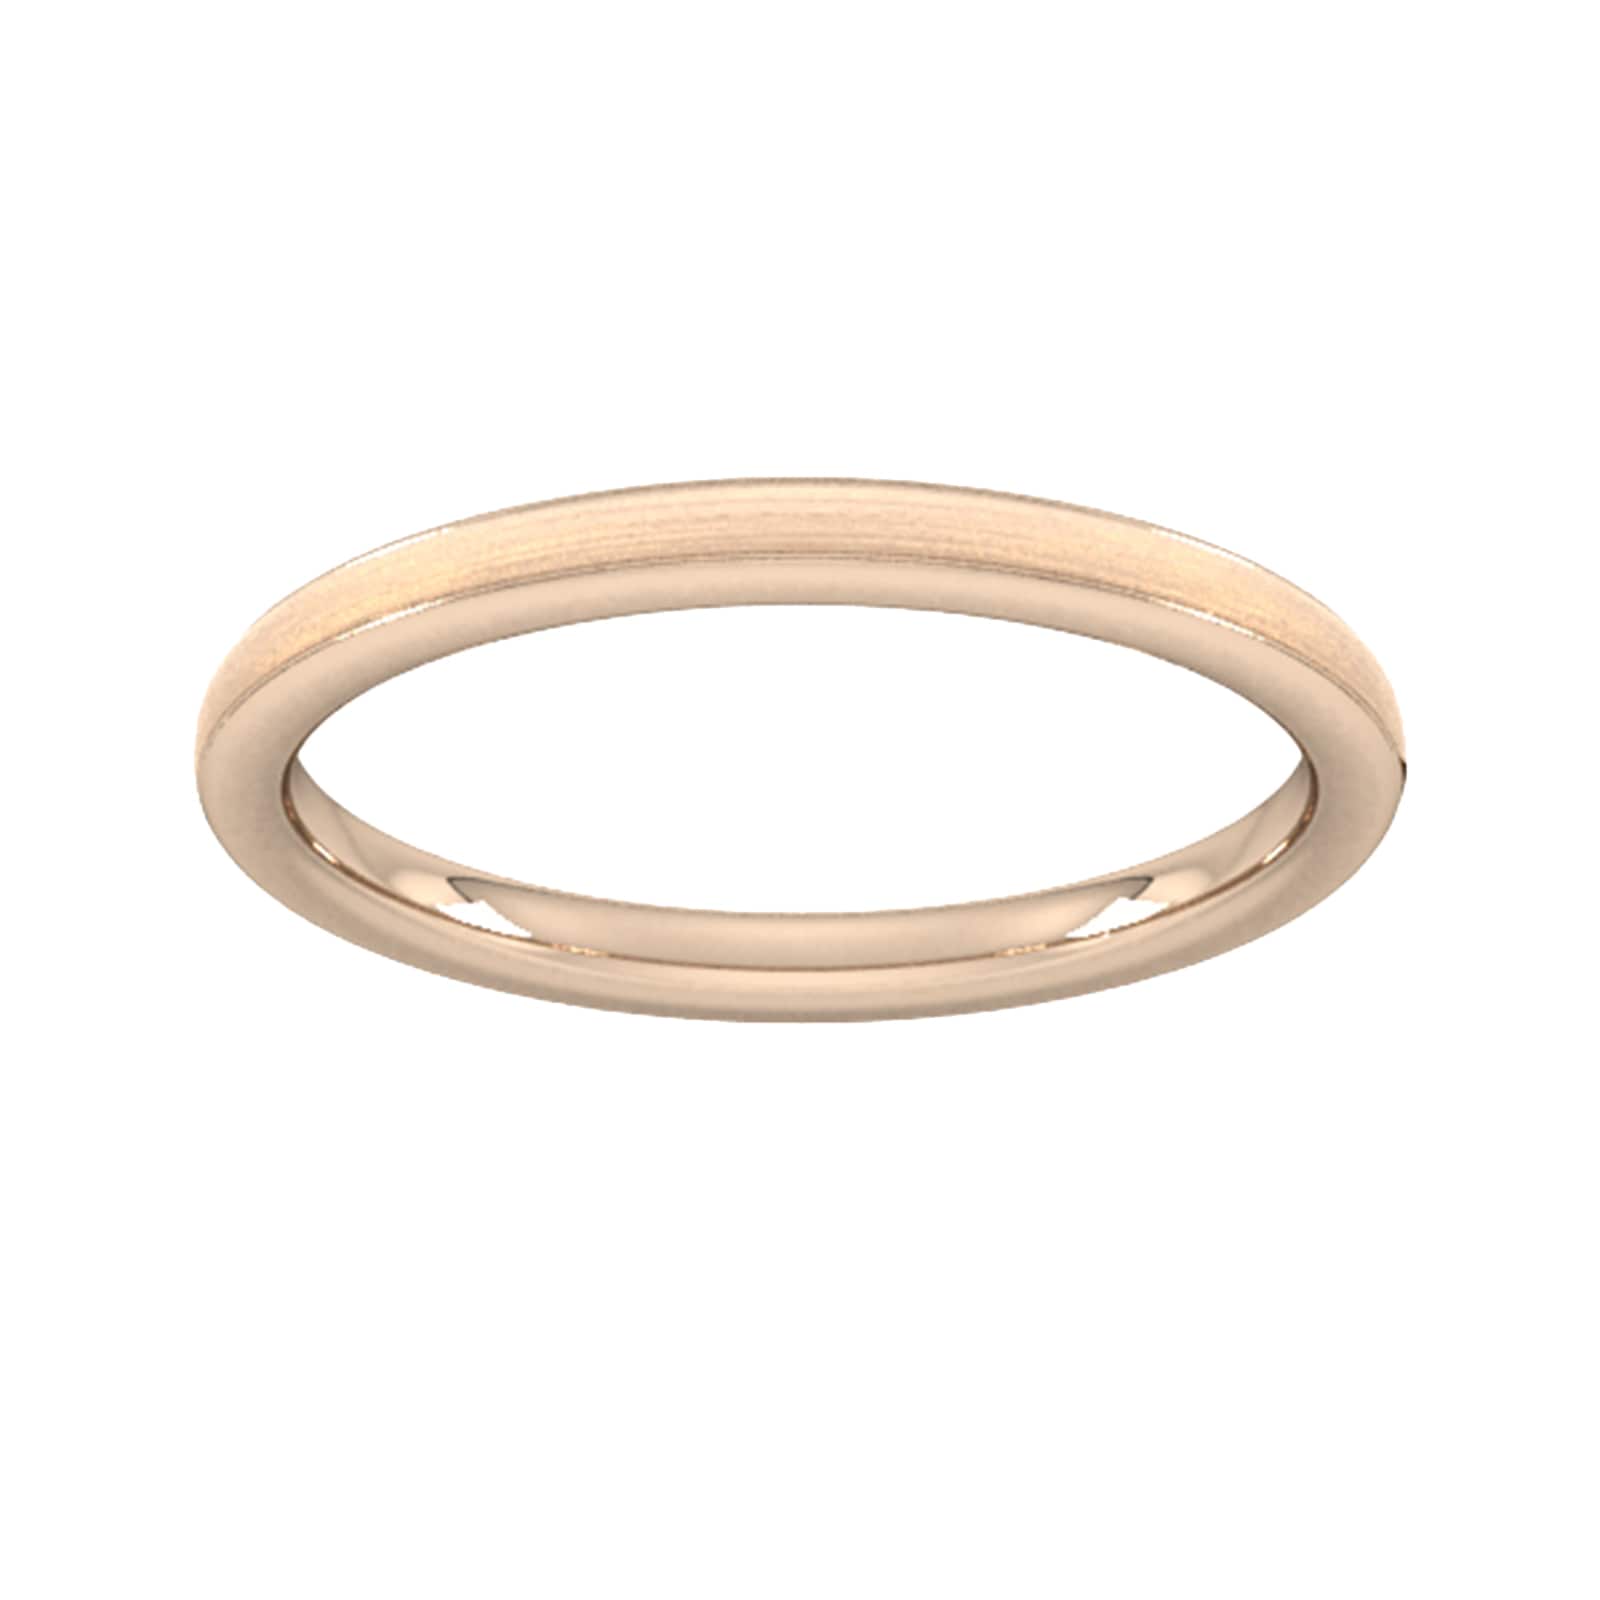 2mm Slight Court Extra Heavy Matt Centre With Grooves Wedding Ring In 18 Carat Rose Gold - Ring Size Y